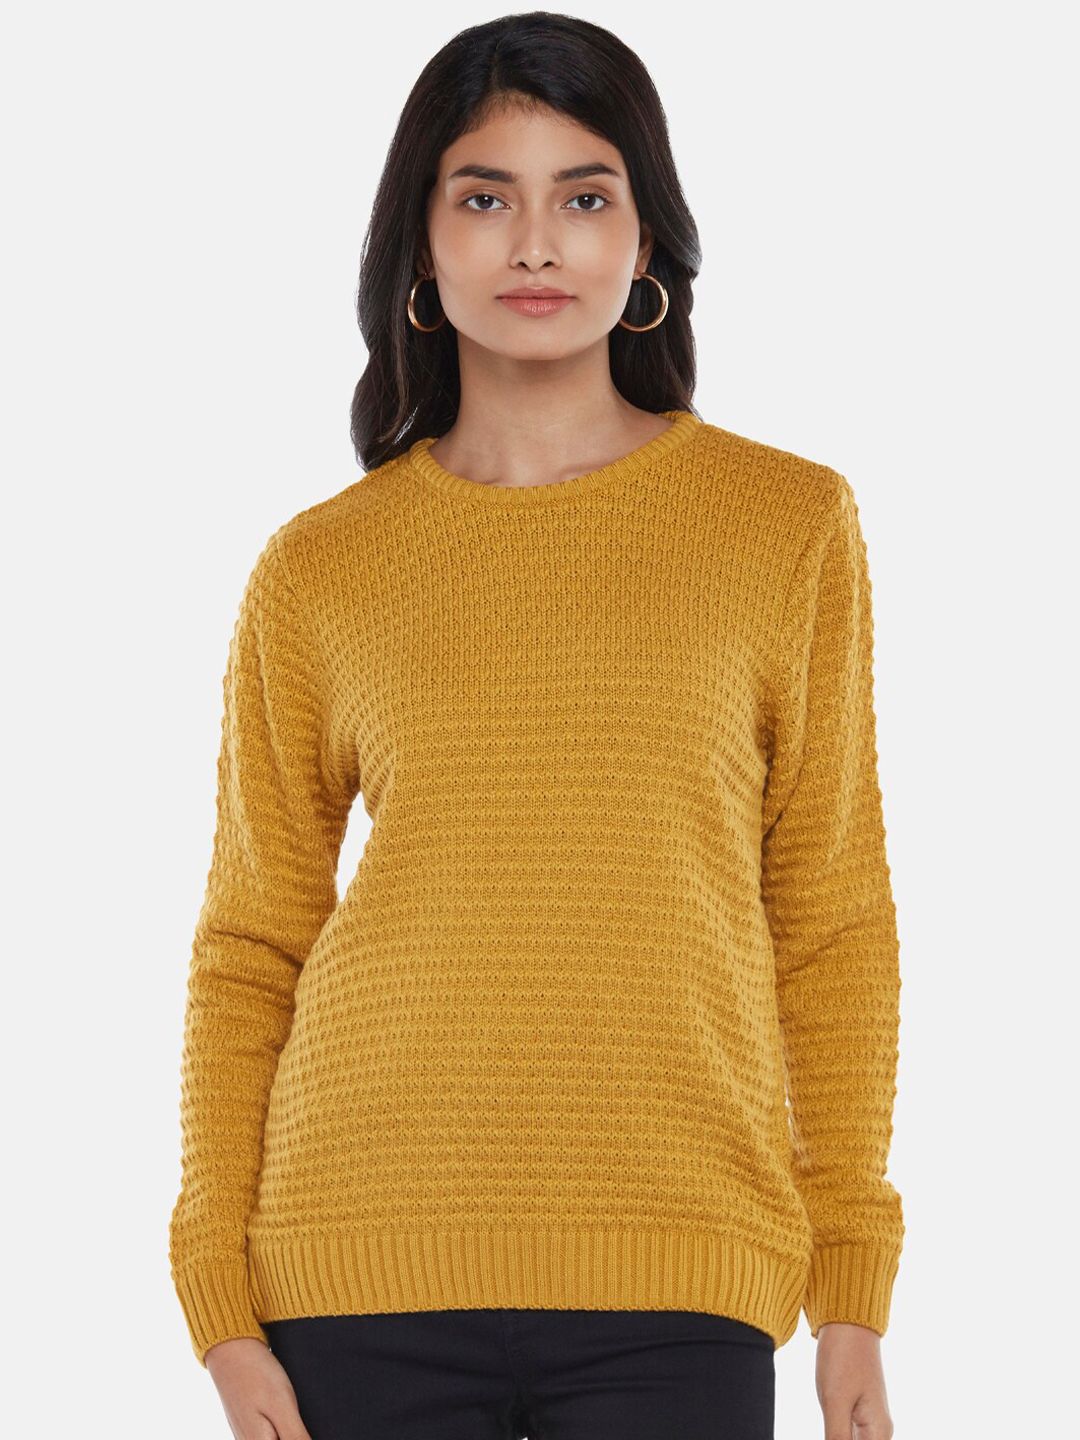 Honey by Pantaloons Women Mustard Cable Knit Pullover Sweater Price in India